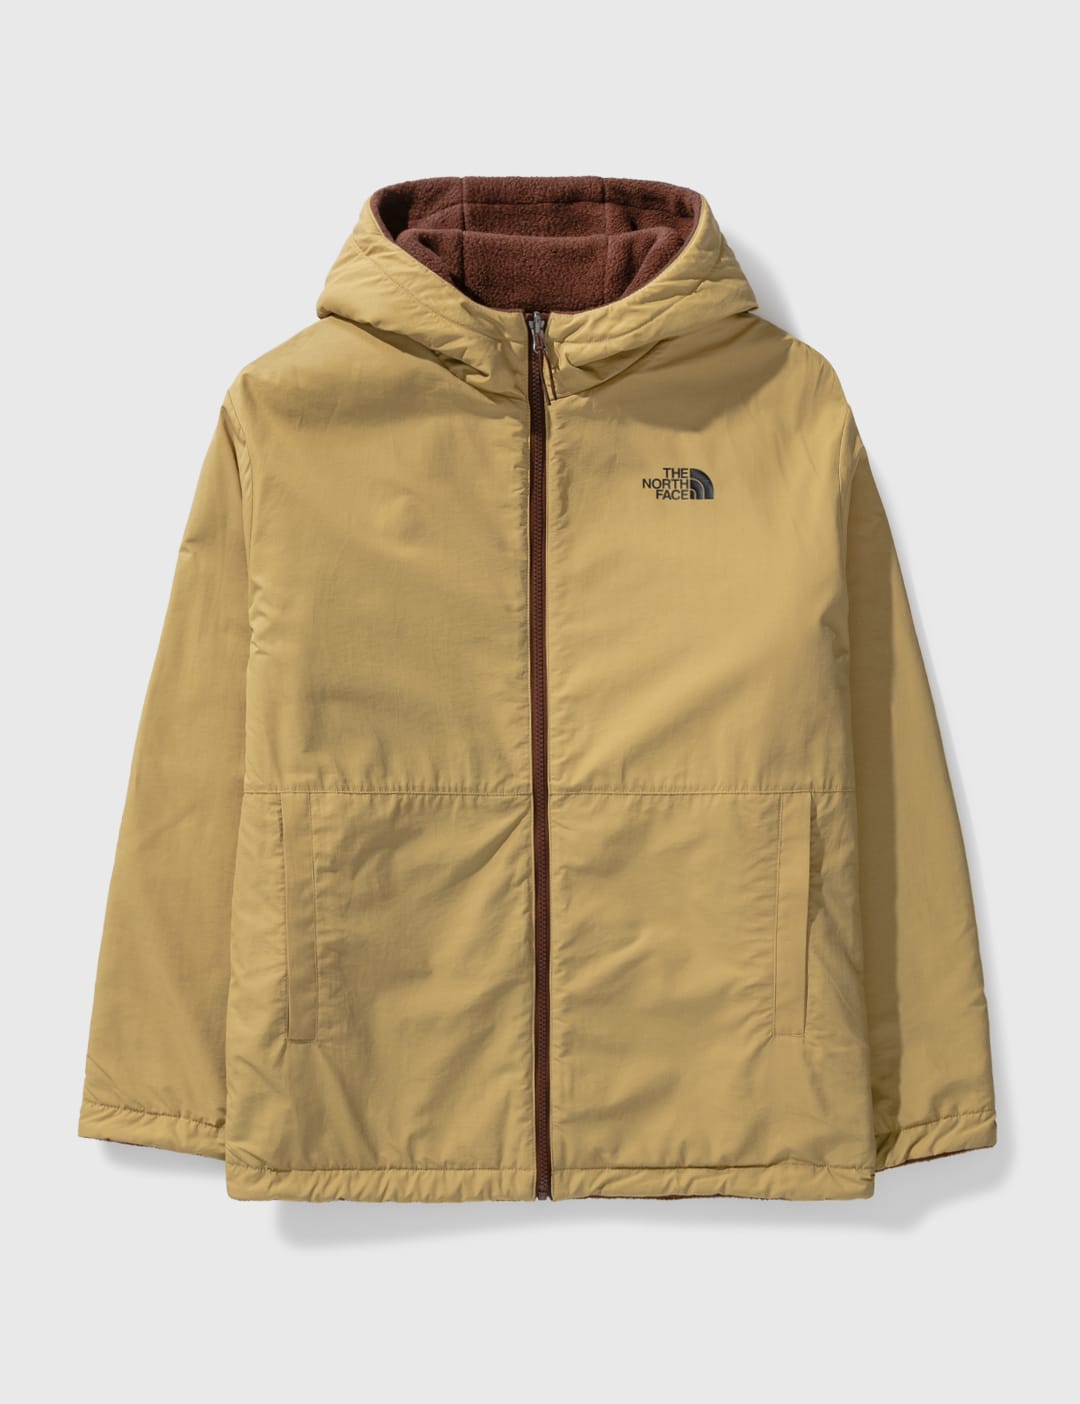 The North Face REVERSIBLE FLEECE JACKET